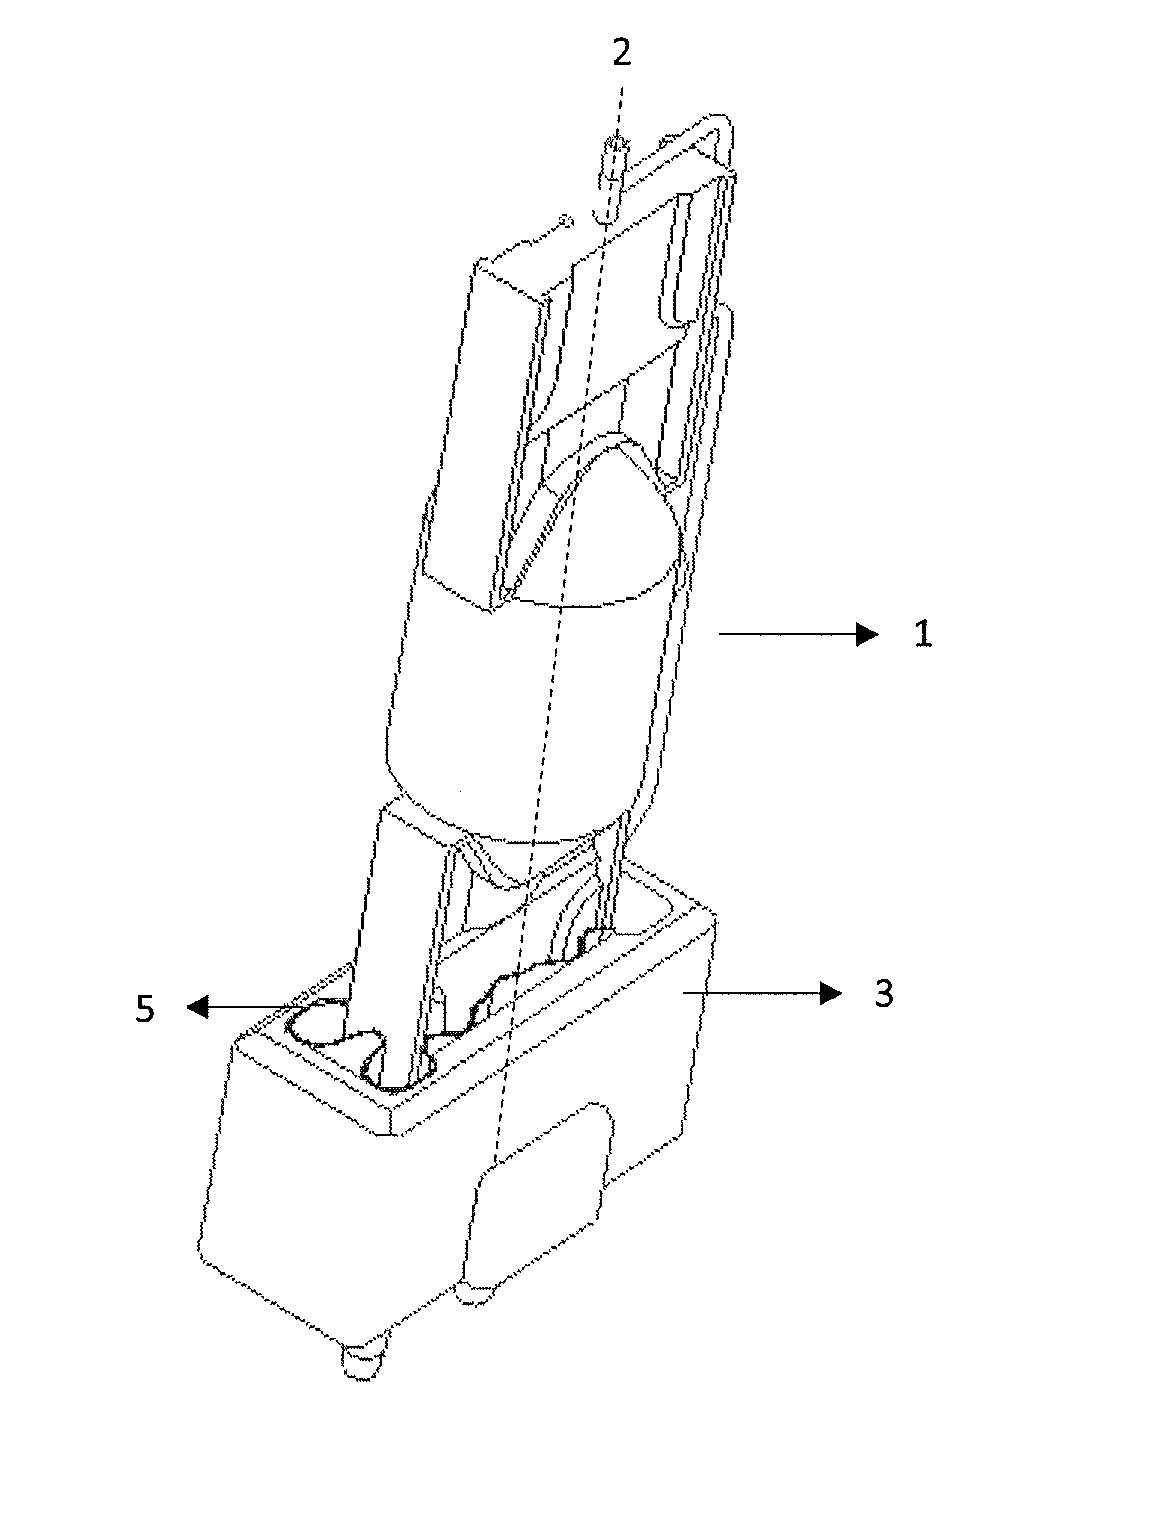 Mounting system for sealing and aligning the burner of the lamp at the centre of its base